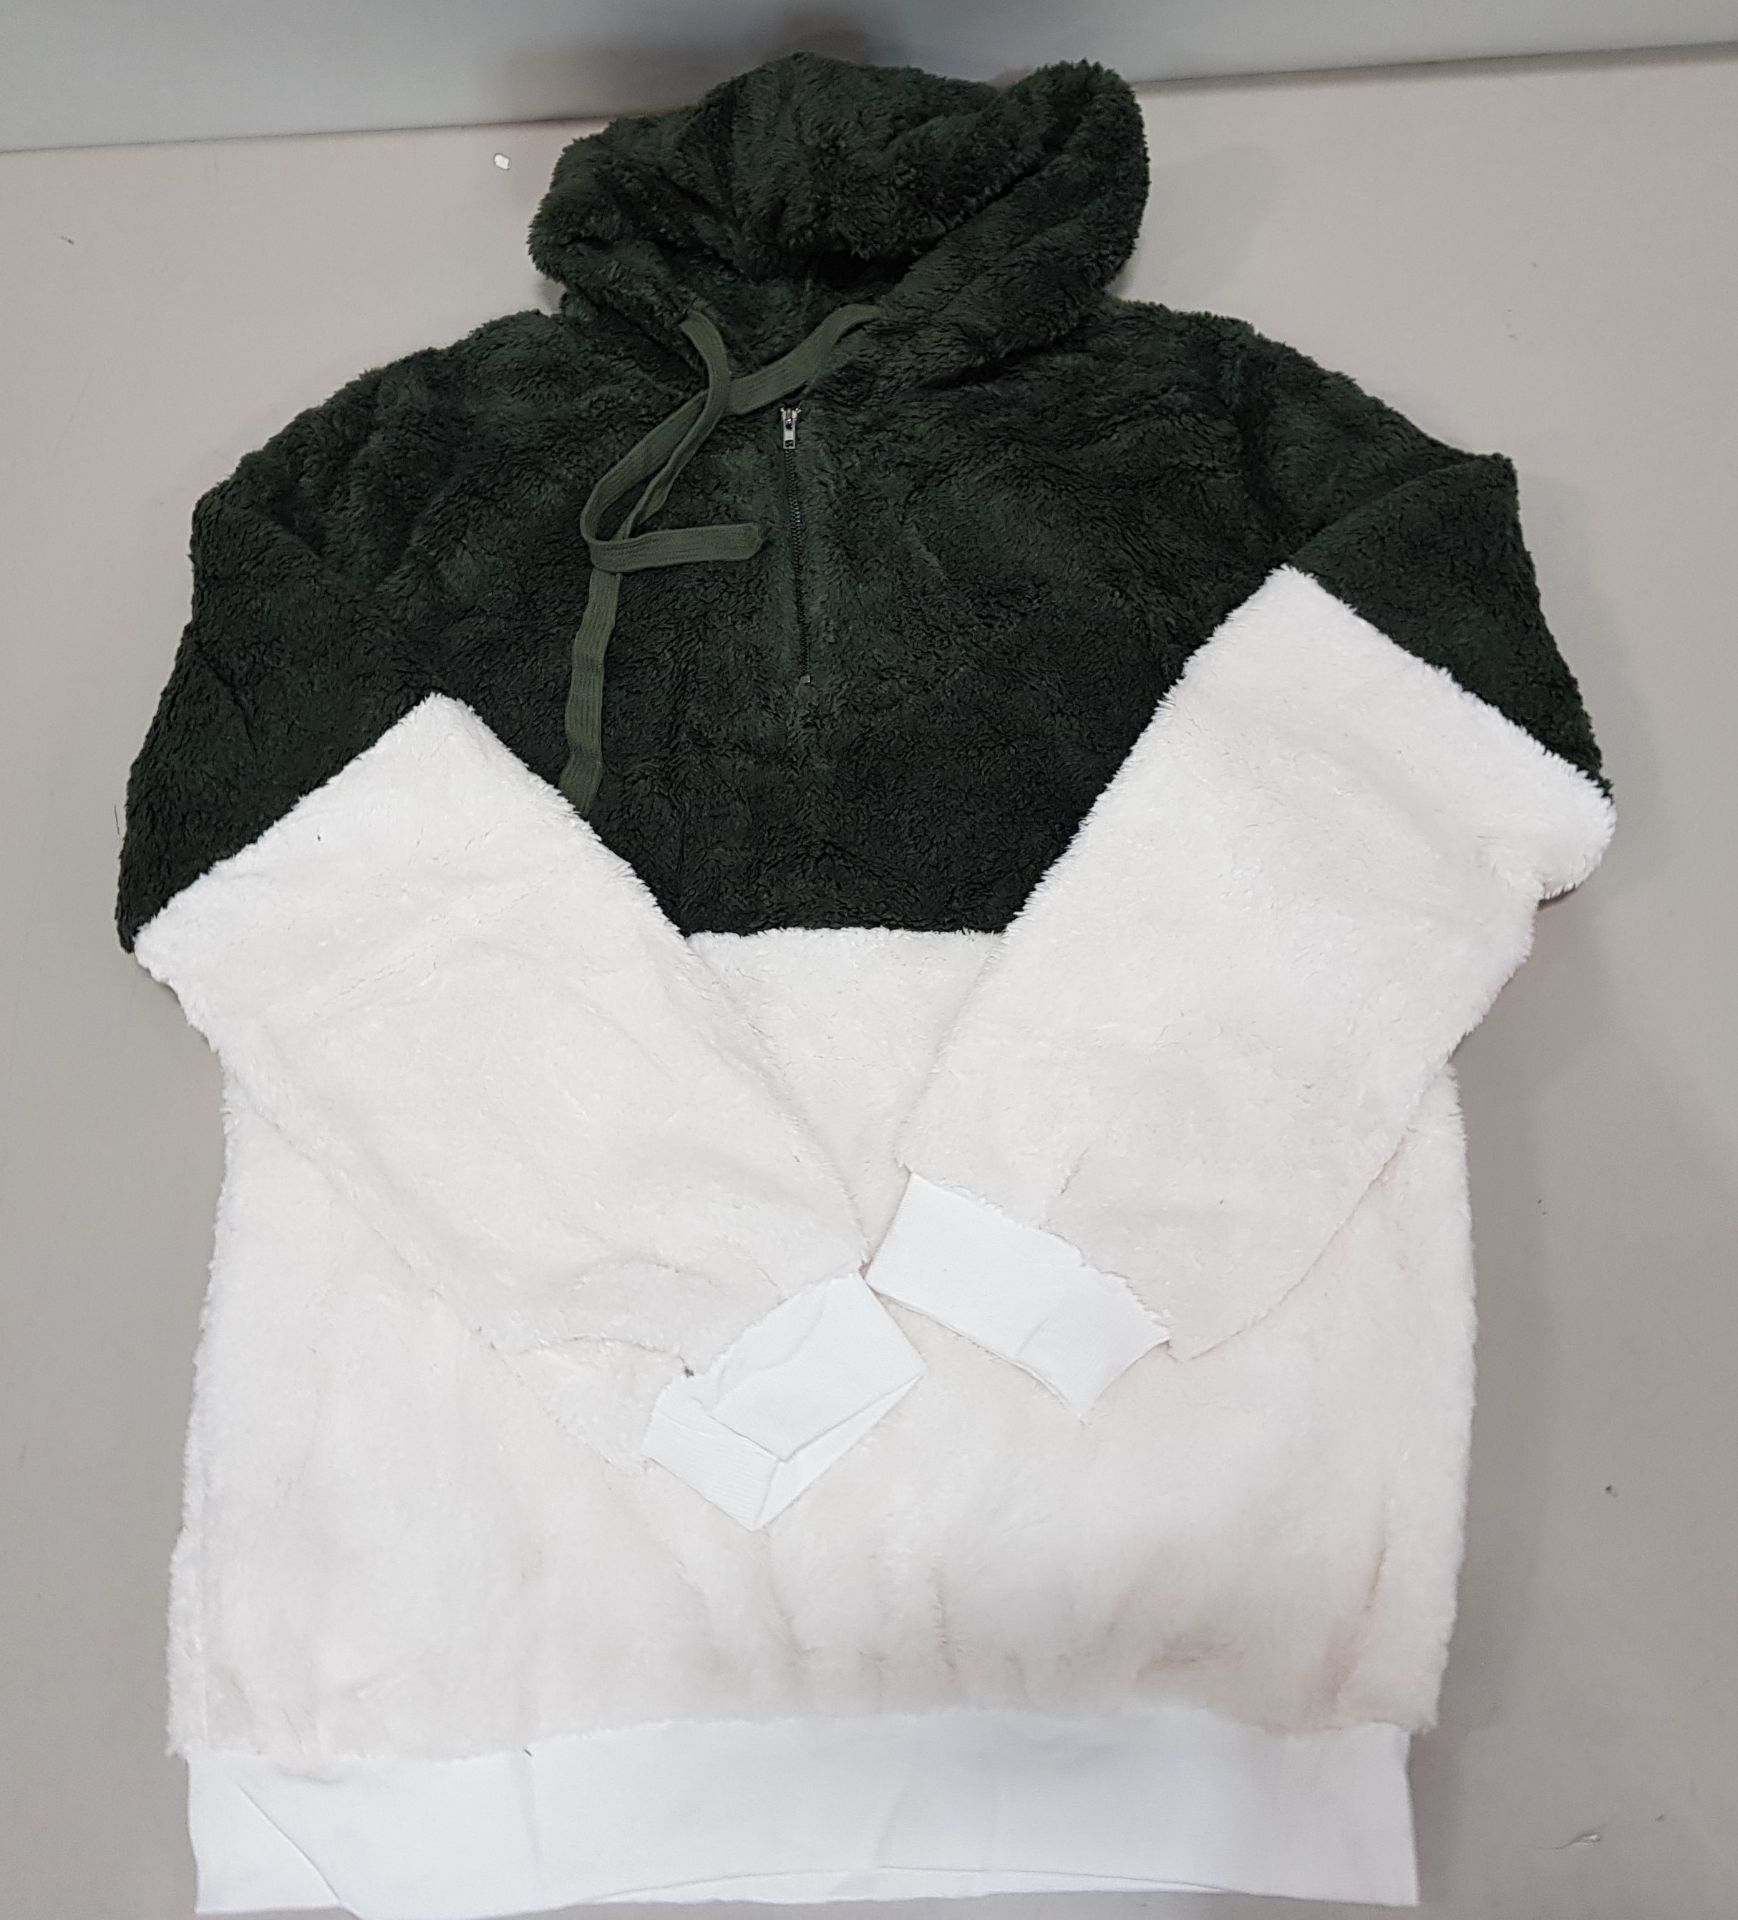 40 X BRAND NEW BWIV WOMANS BAGGY FLUFFY QUARTER ZIP FLEECES IE. 20 ALL IN PURE WHITE AND GREEN - ALL